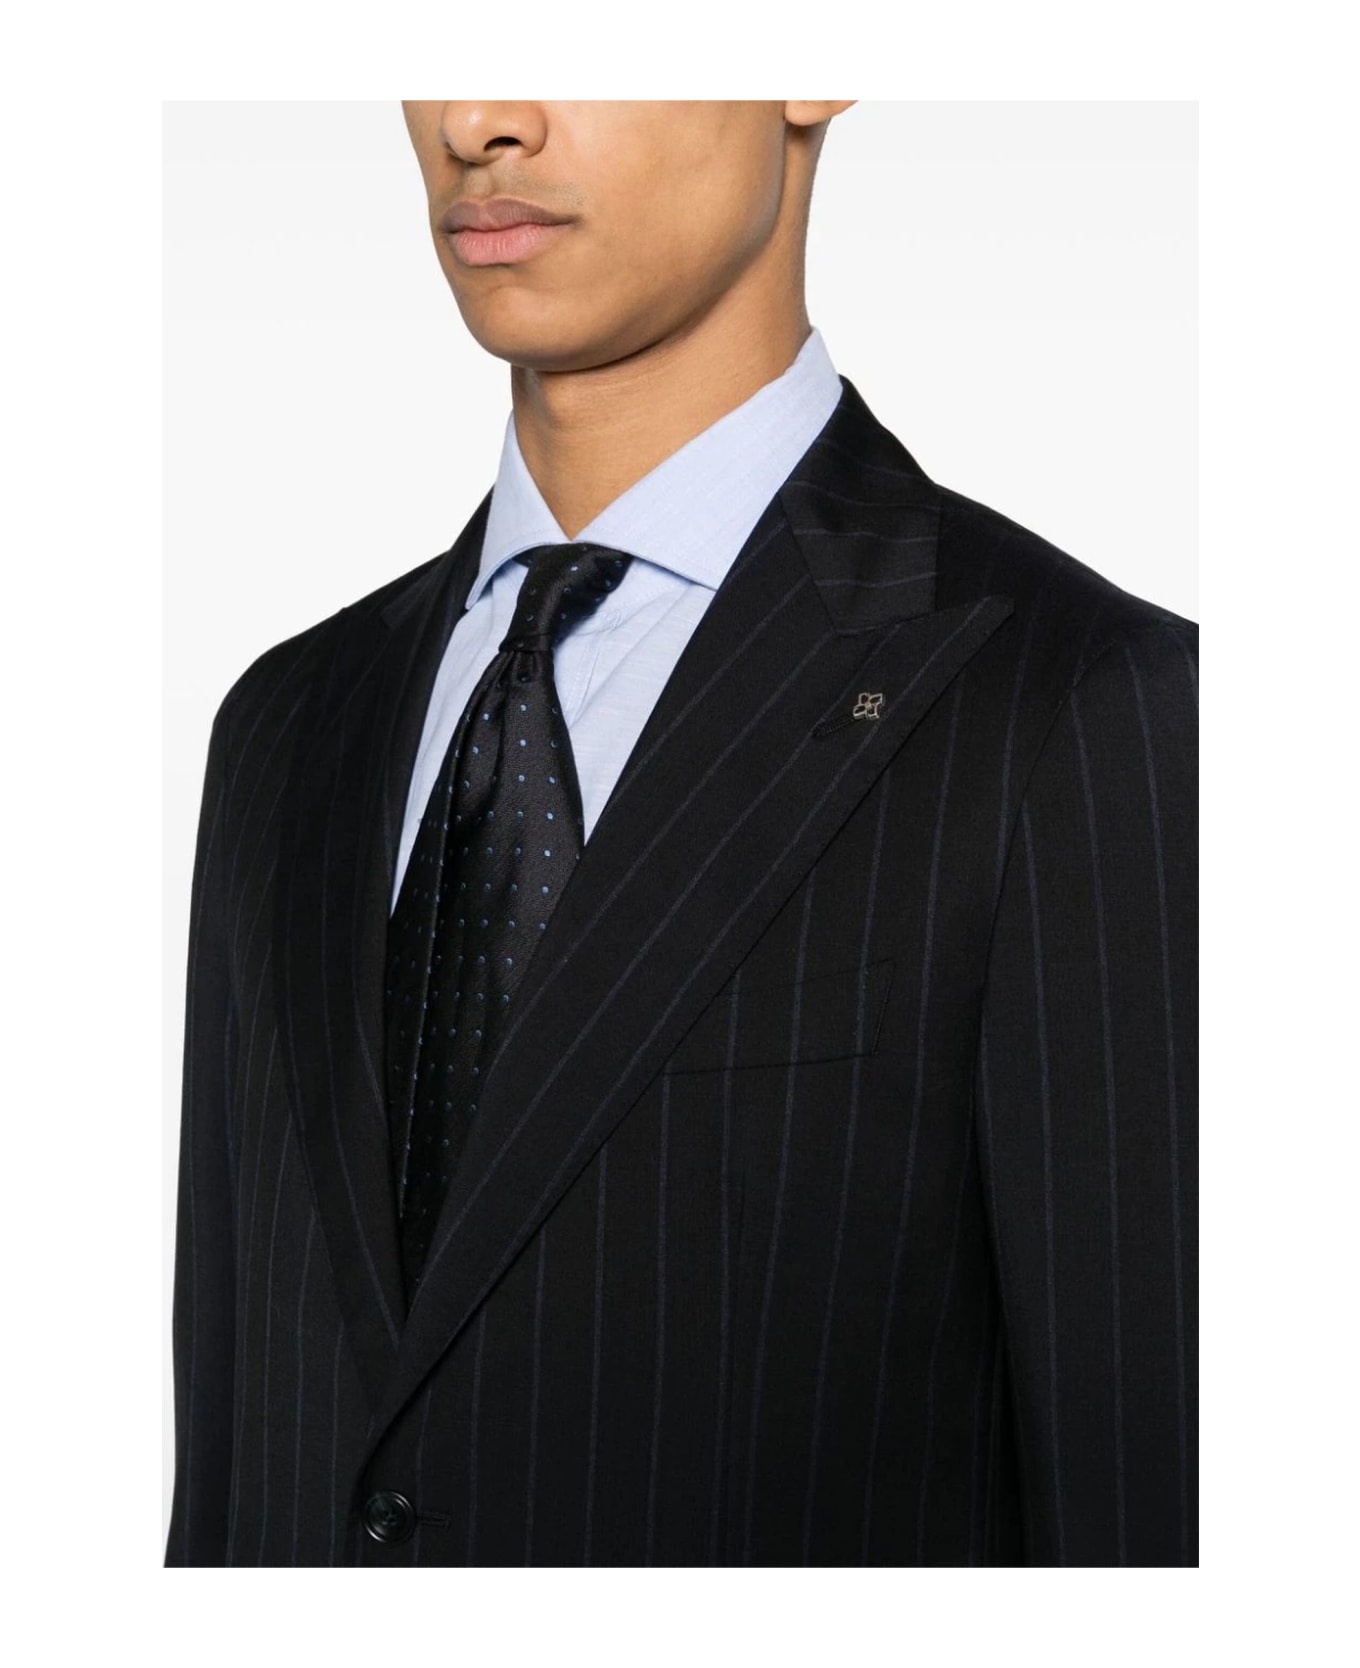 Tagliatore Dark Blue Pinstriped Double-breasted Wool Suit - Blue スーツ